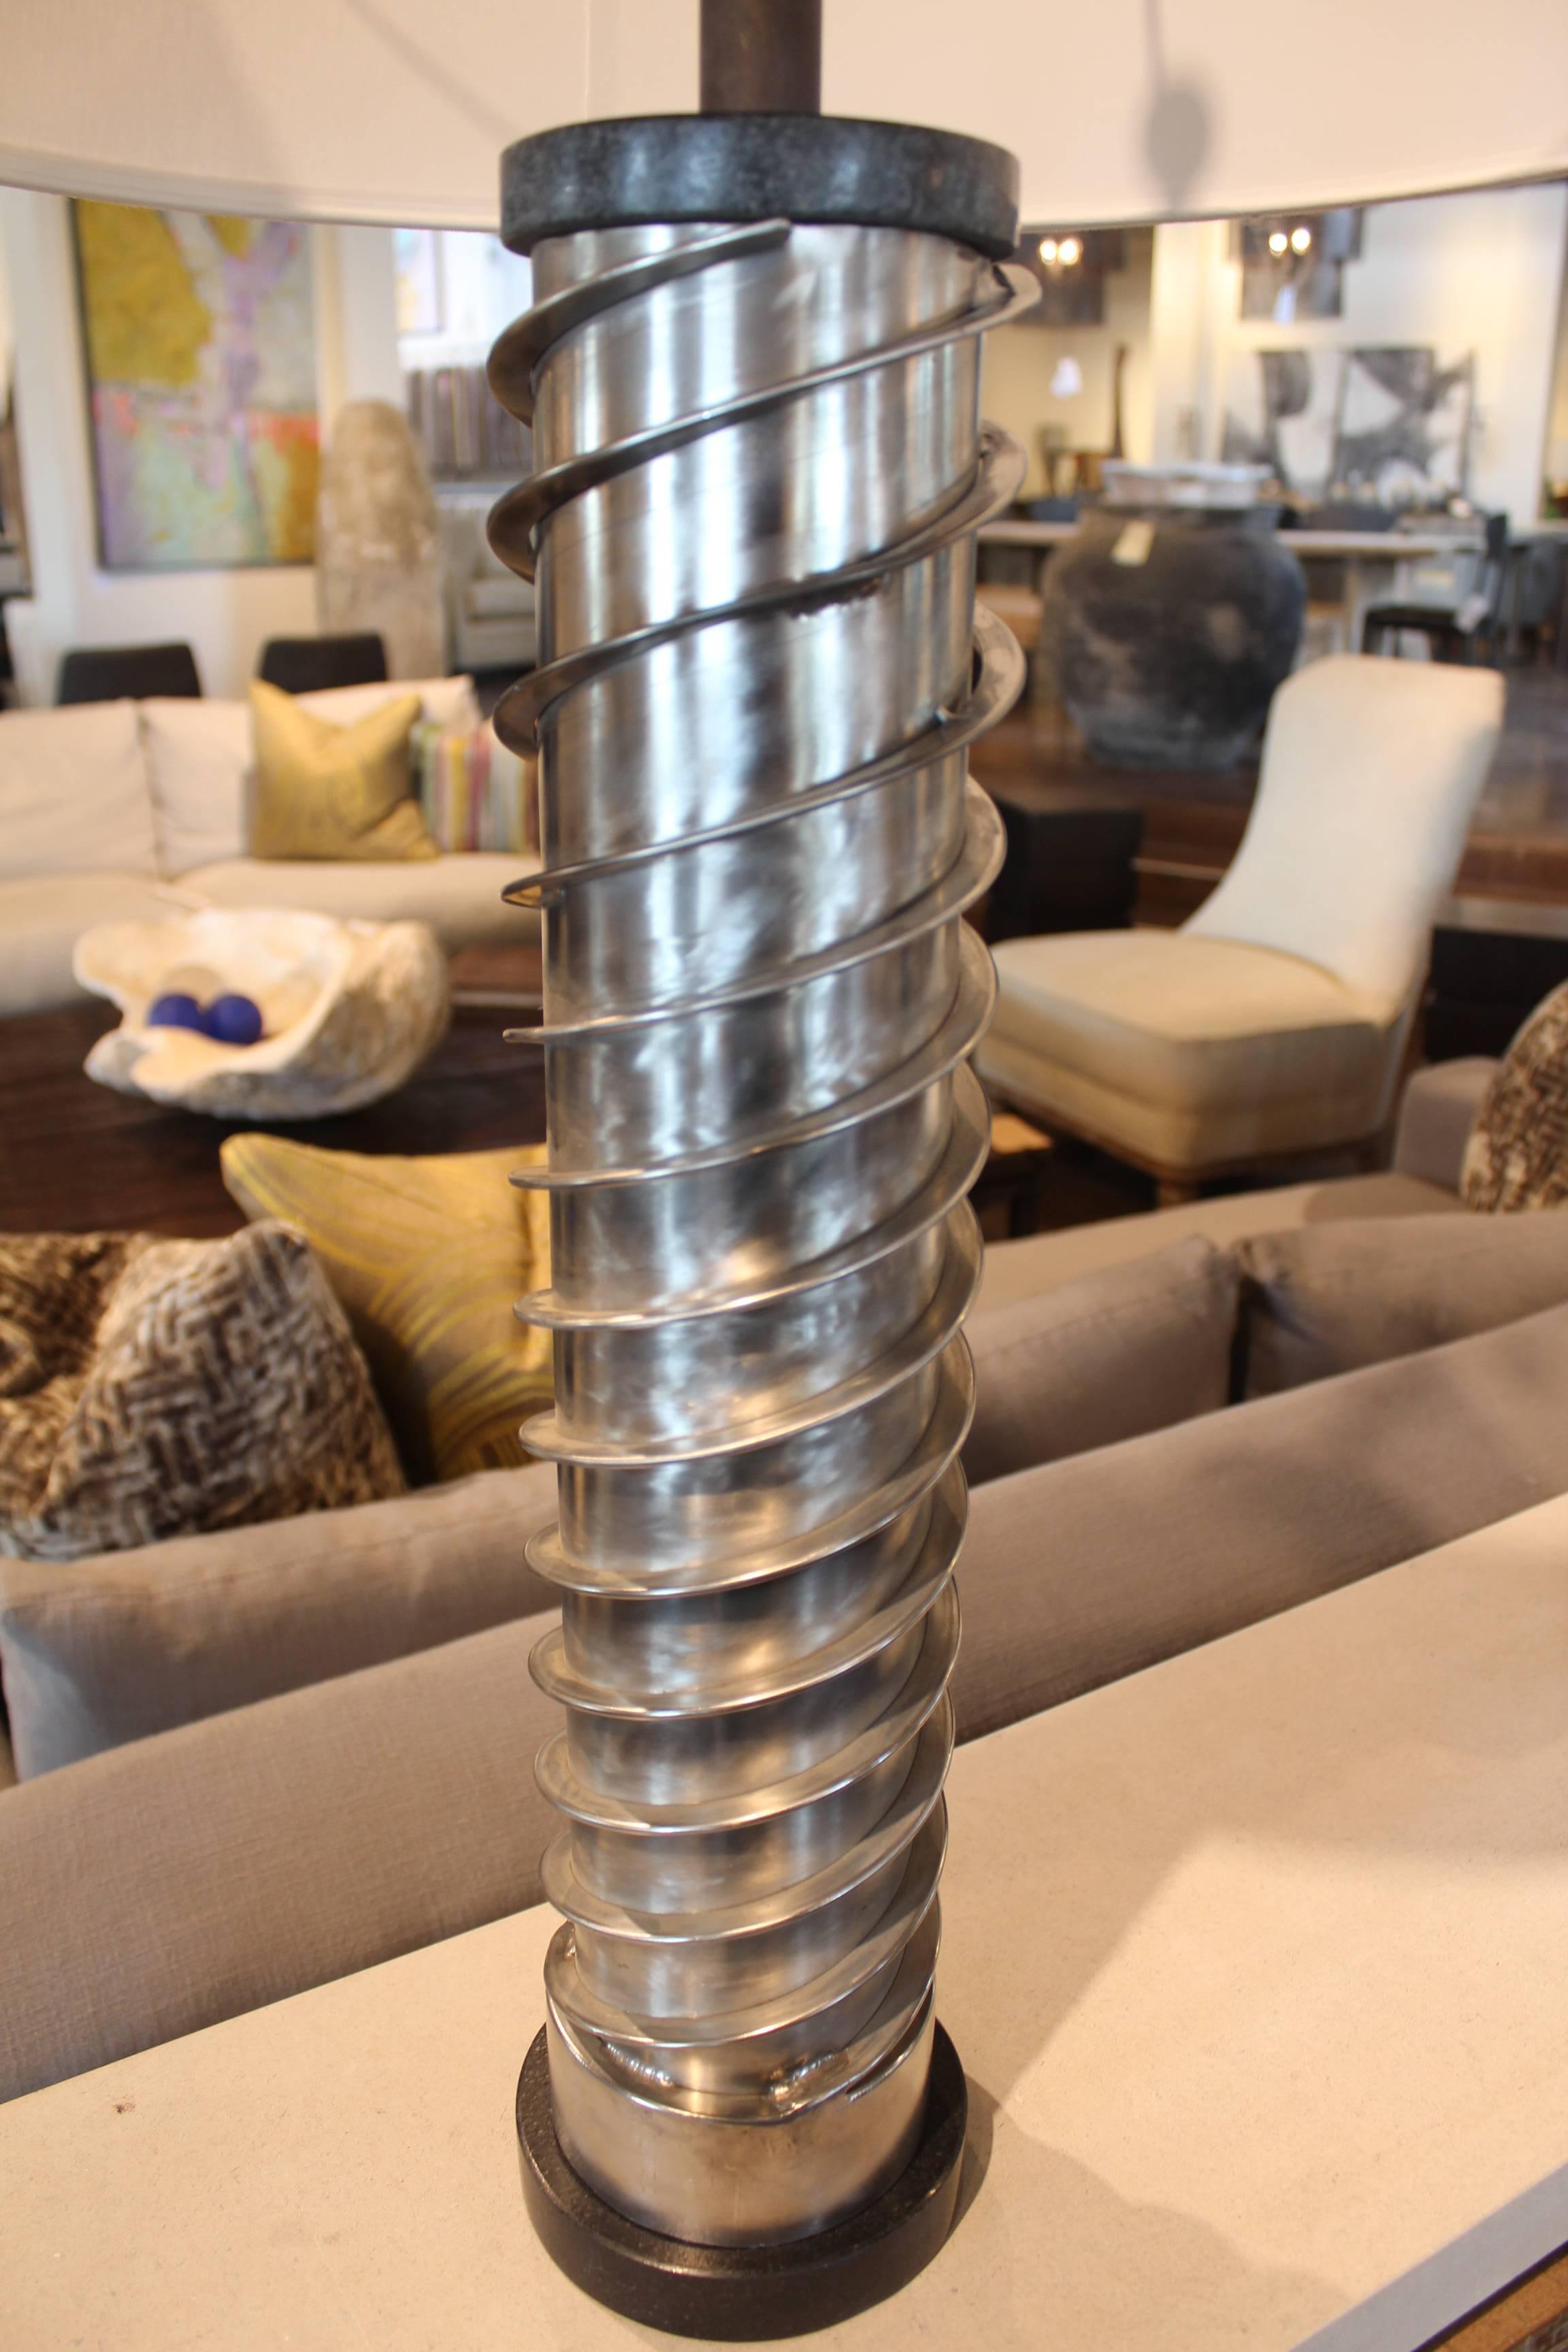 Vintage French stainless steel Industrial spiral as table lamp.